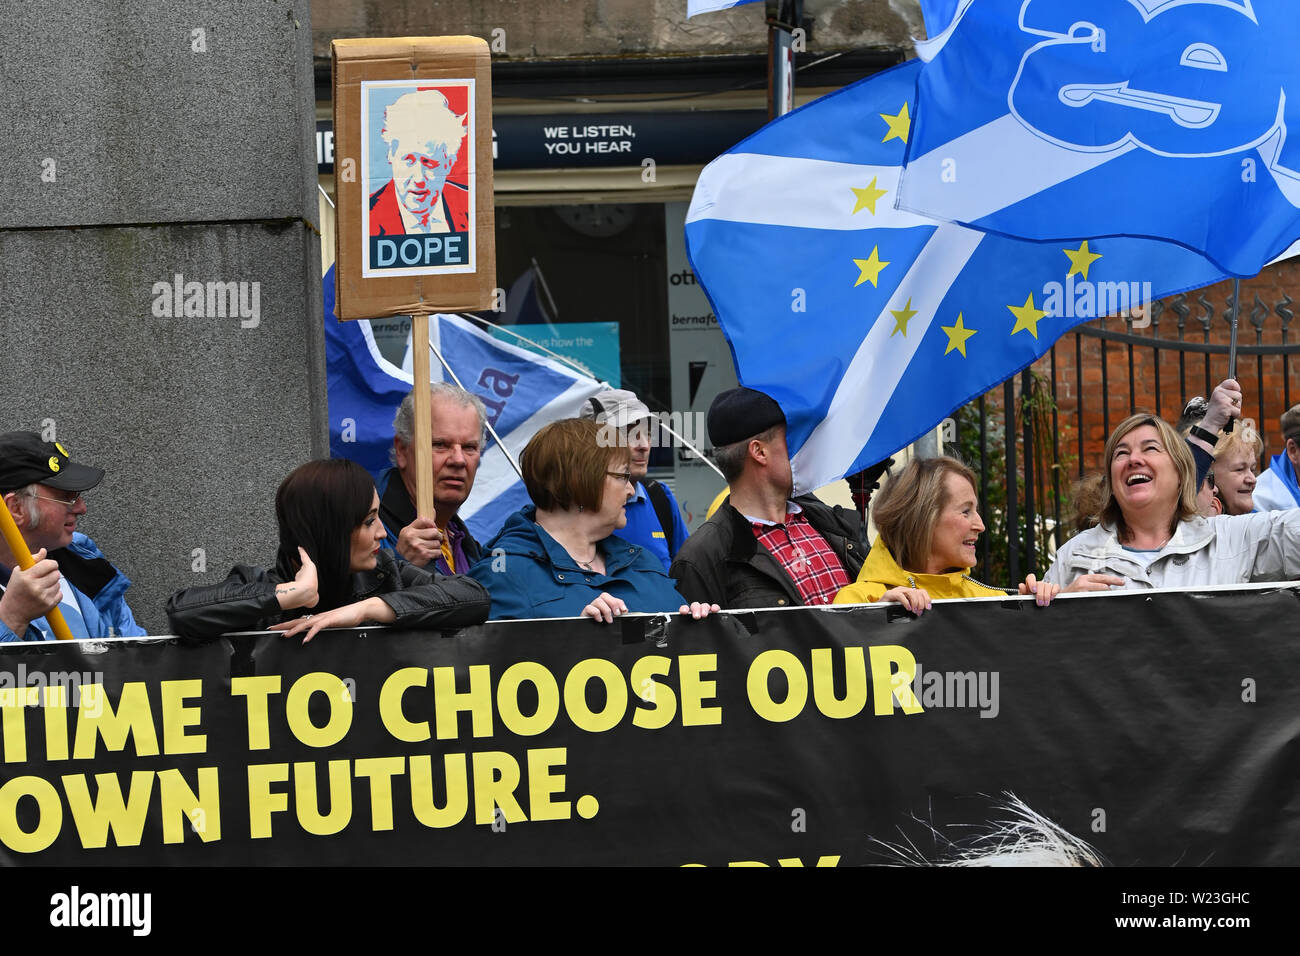 Perth, Scotland, United Kingdom. 05th July, 2019. Independence and Remain supporters protest outside Perth Concert Hall before Conservative Party leadership contenders Boris Johnson and Jeremy Hunt take part in one of a series of leadership election hustings for party members around the UK. Credit: Ken Jack/Alamy Live News Stock Photo